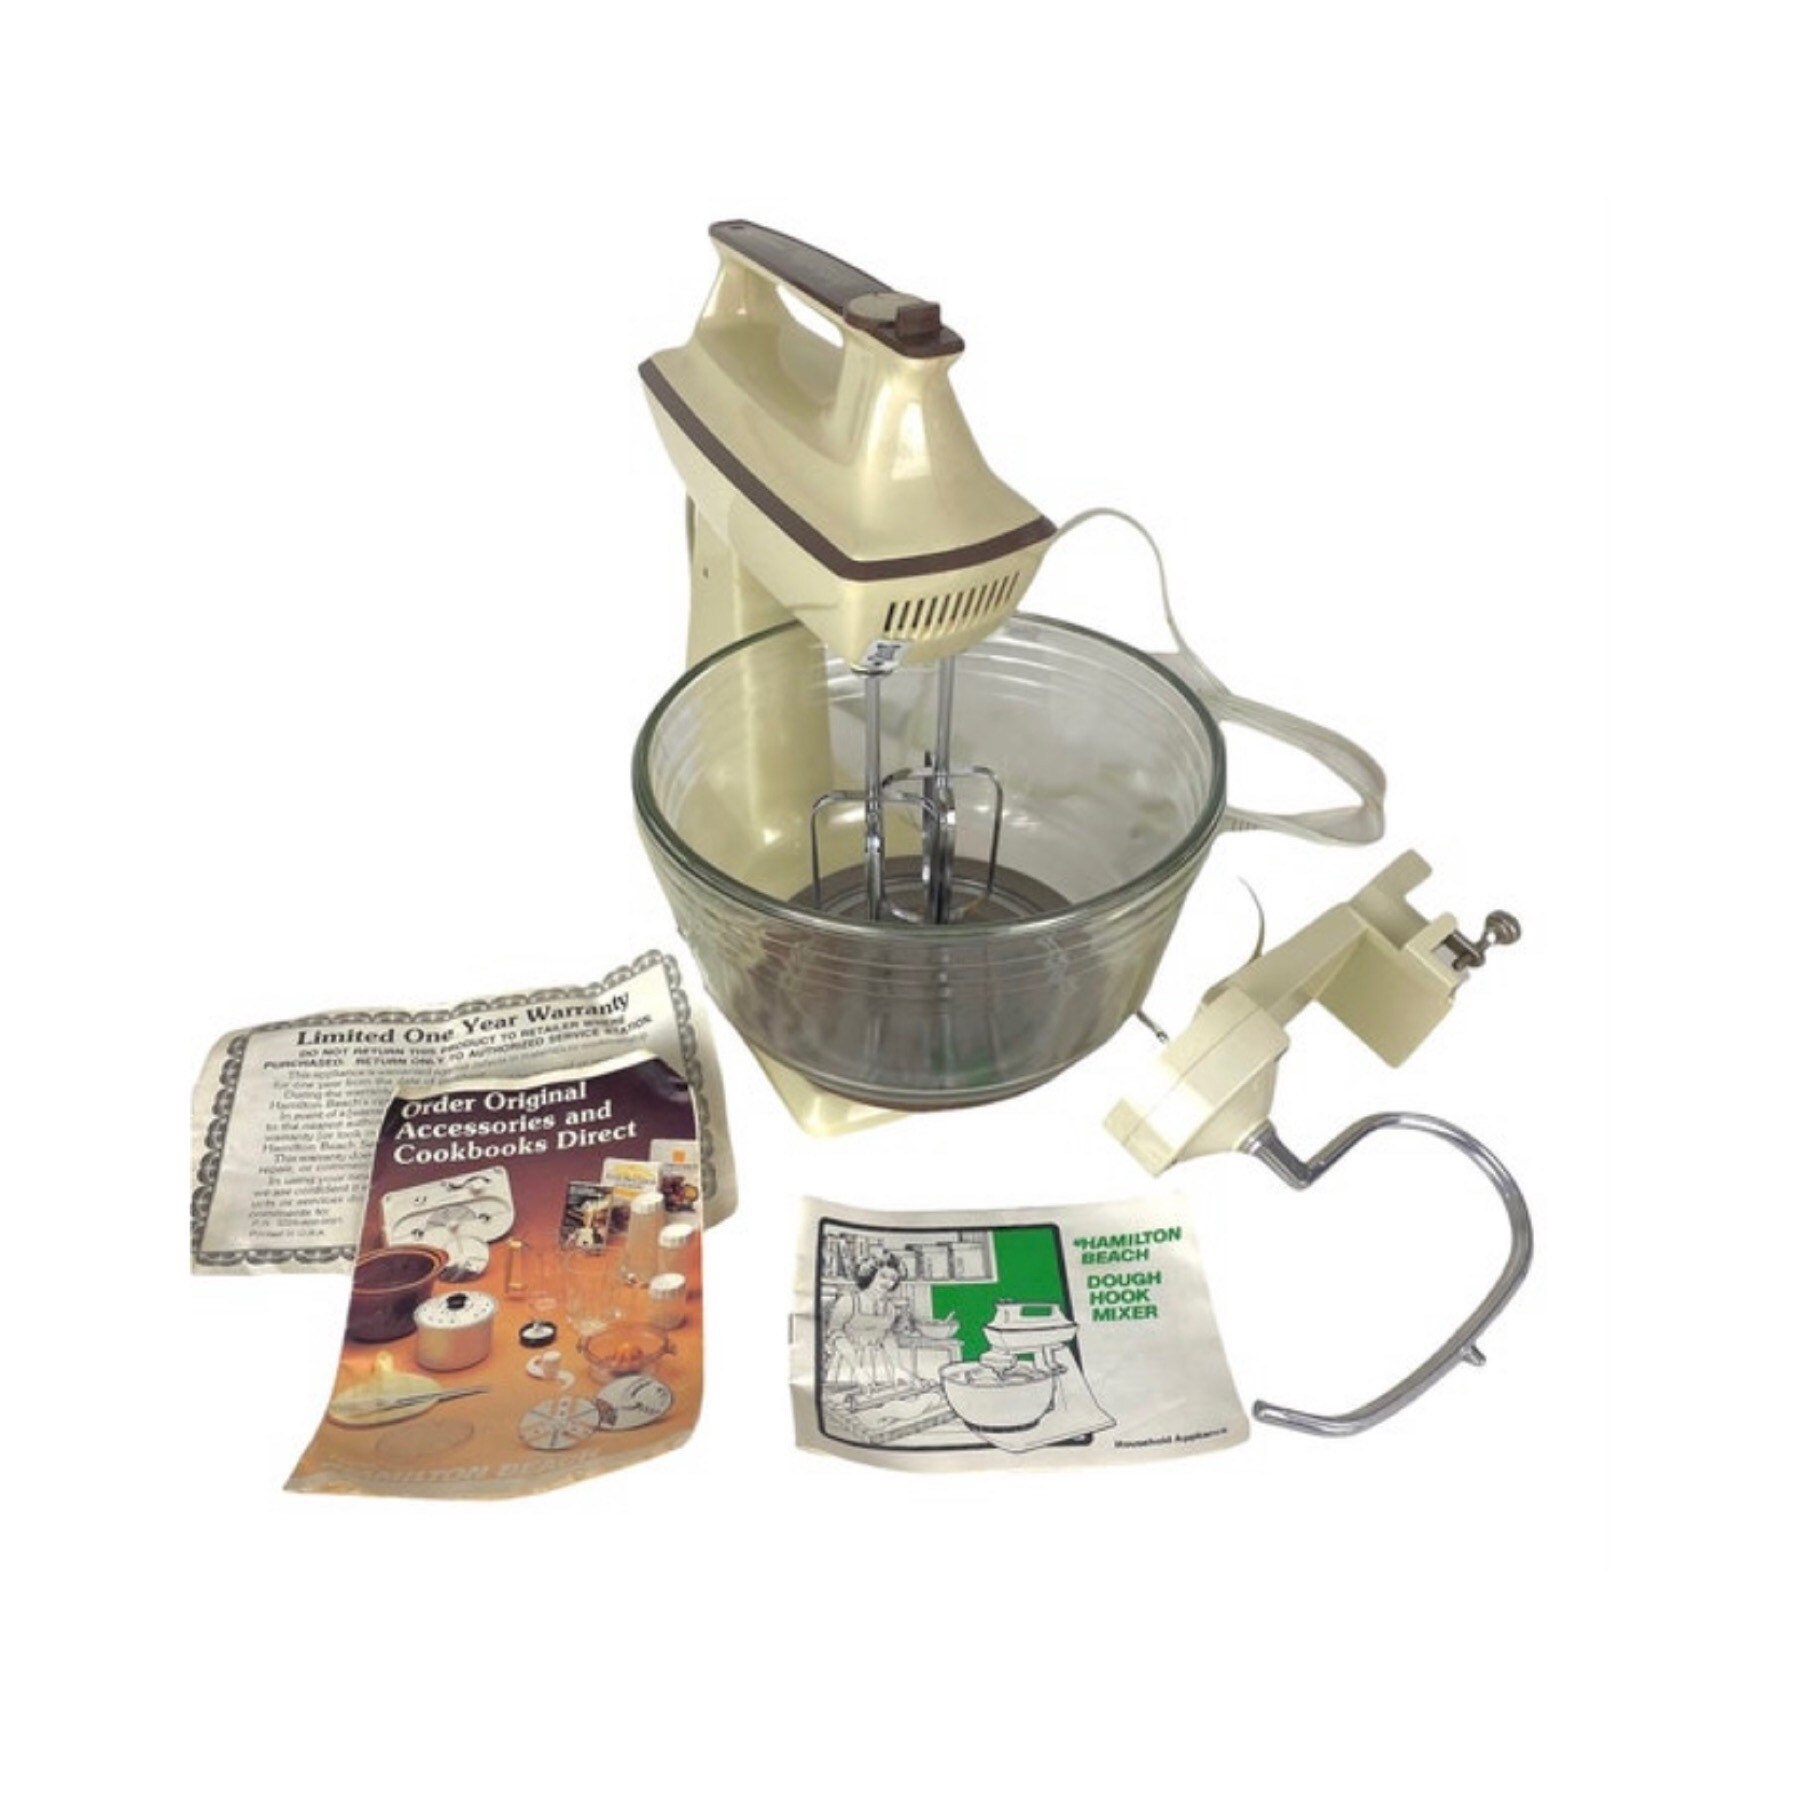 Vintage Hamilton Beach Scovill Model K Mixer w/ 2 Mixing Bowls and Beaters-  powered on - Northern Kentucky Auction, LLC